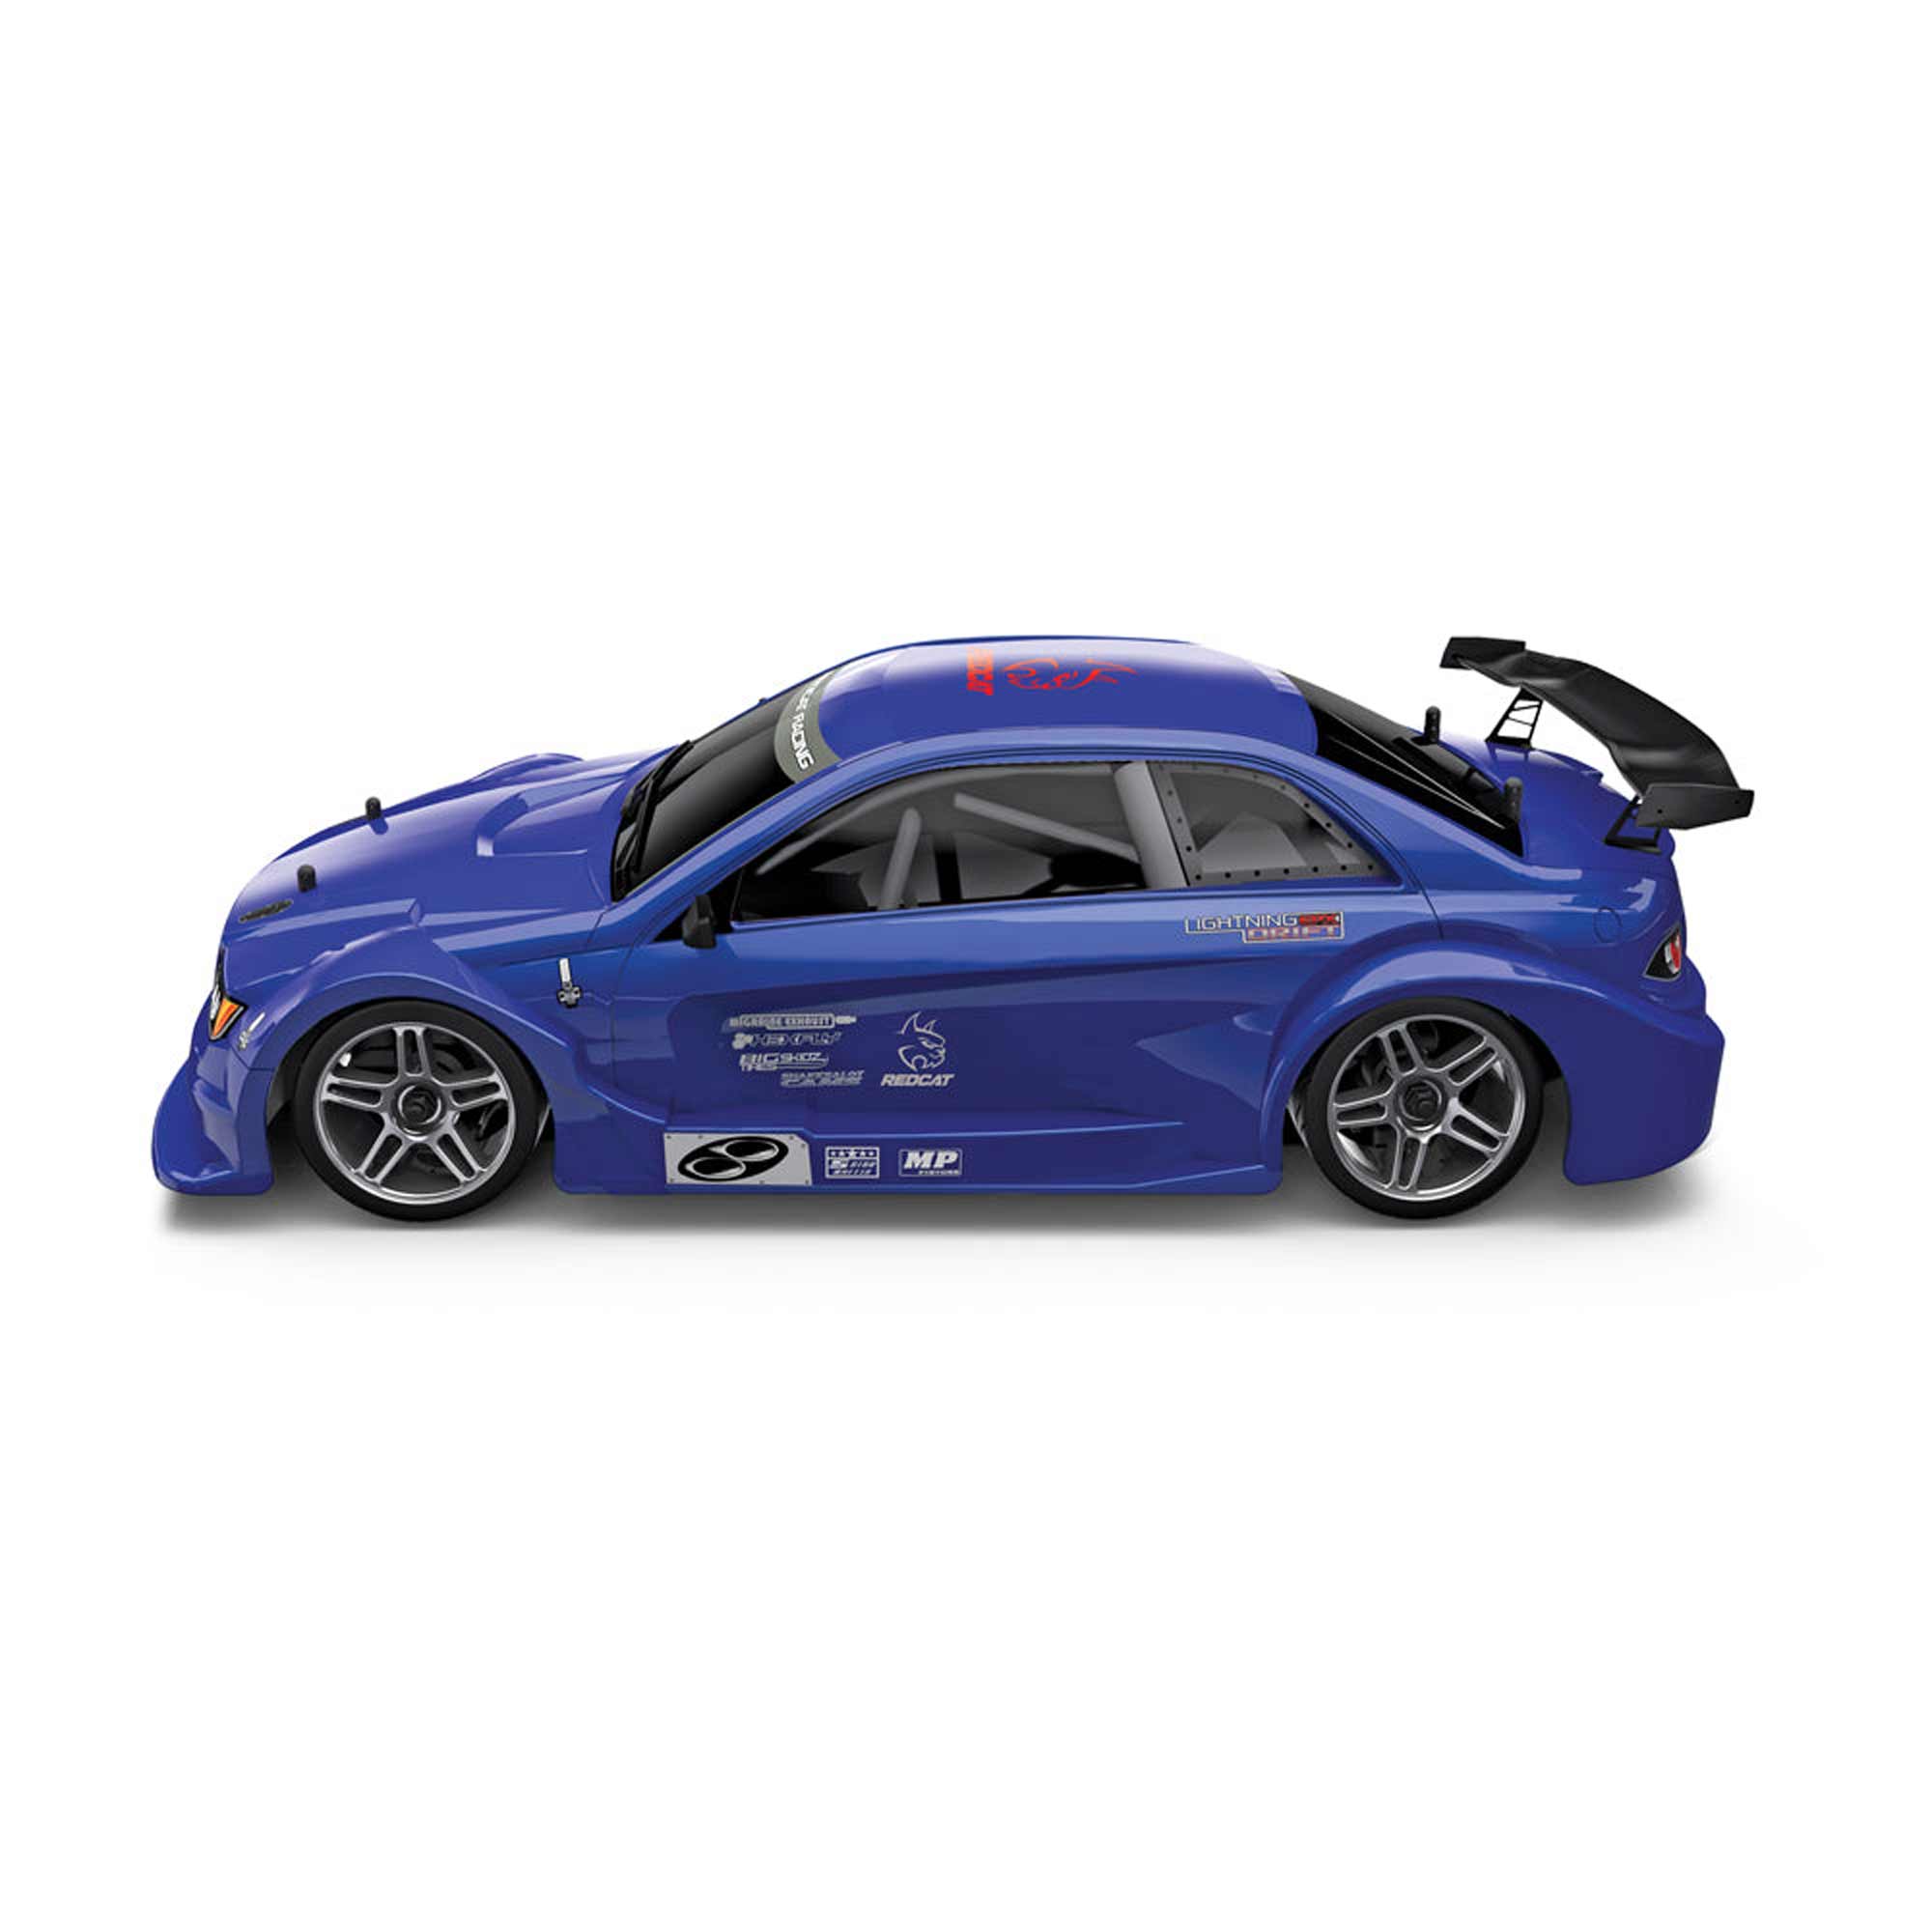 Redcat Racing 1/10 Lightning EPX Drift 4 Wheel Drive Brushed RTR Ready to Run Blue RER08003 Cars Electric RTR 1/10 Off-Road - image 3 of 11